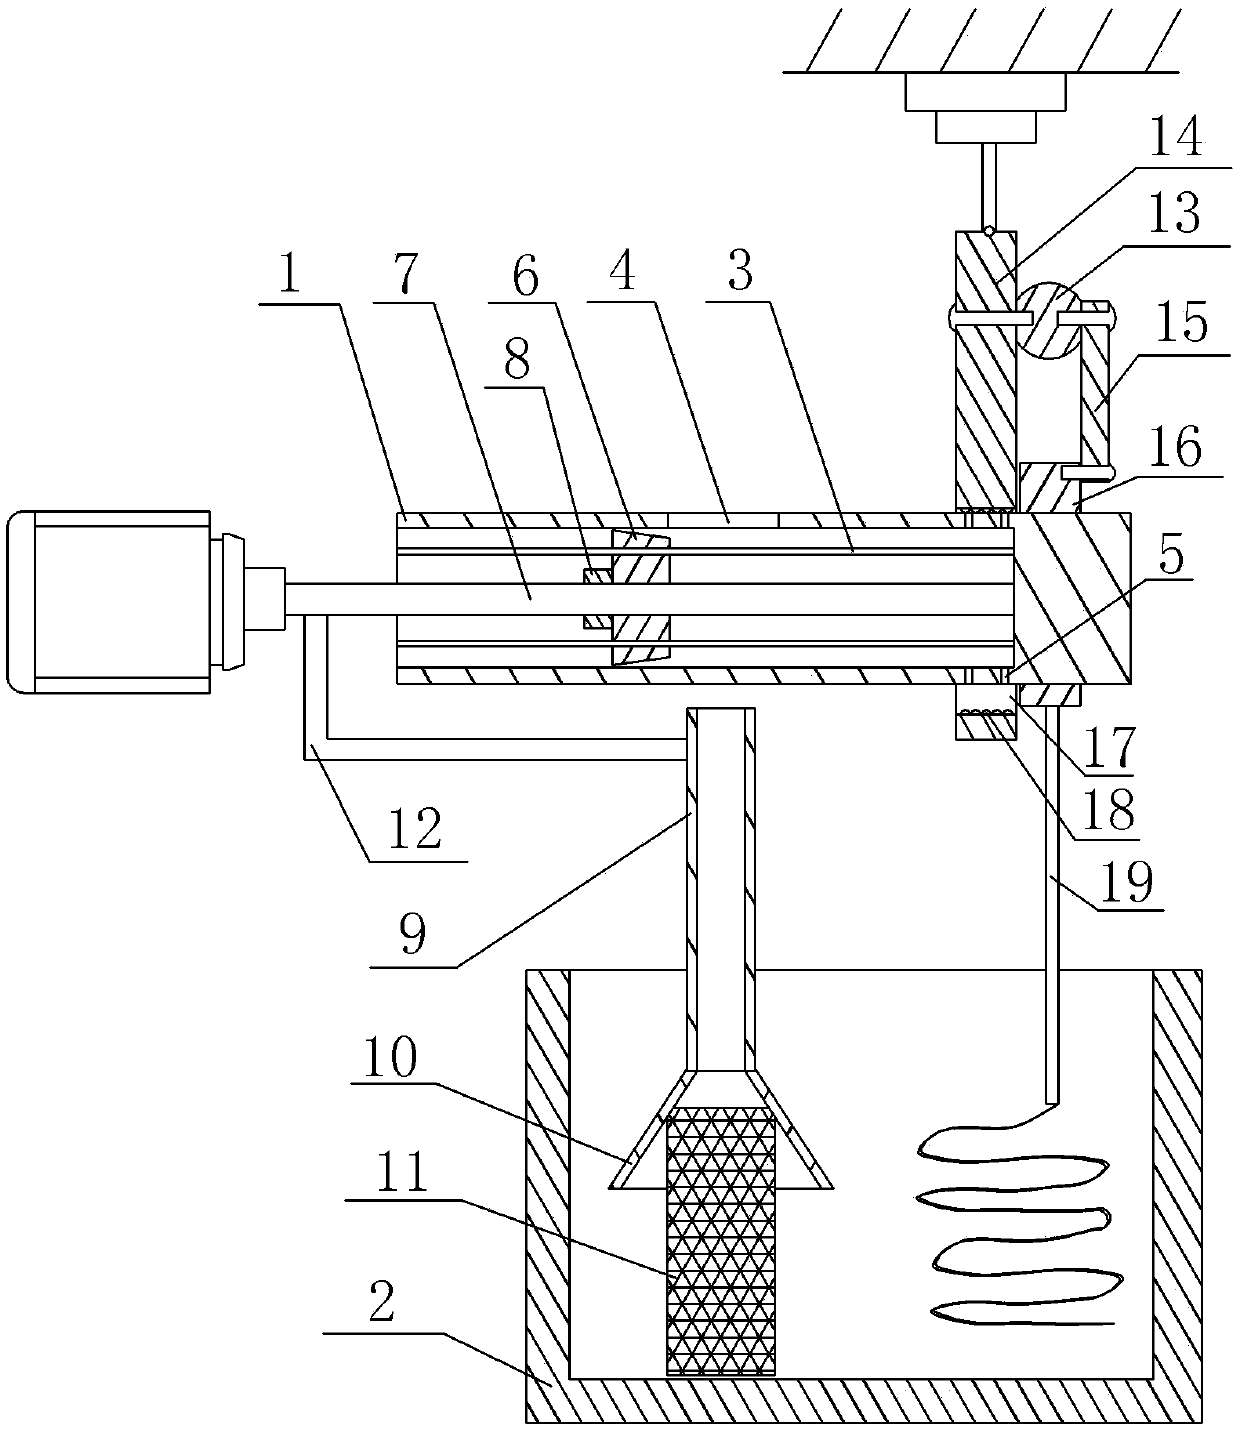 Textile processing device